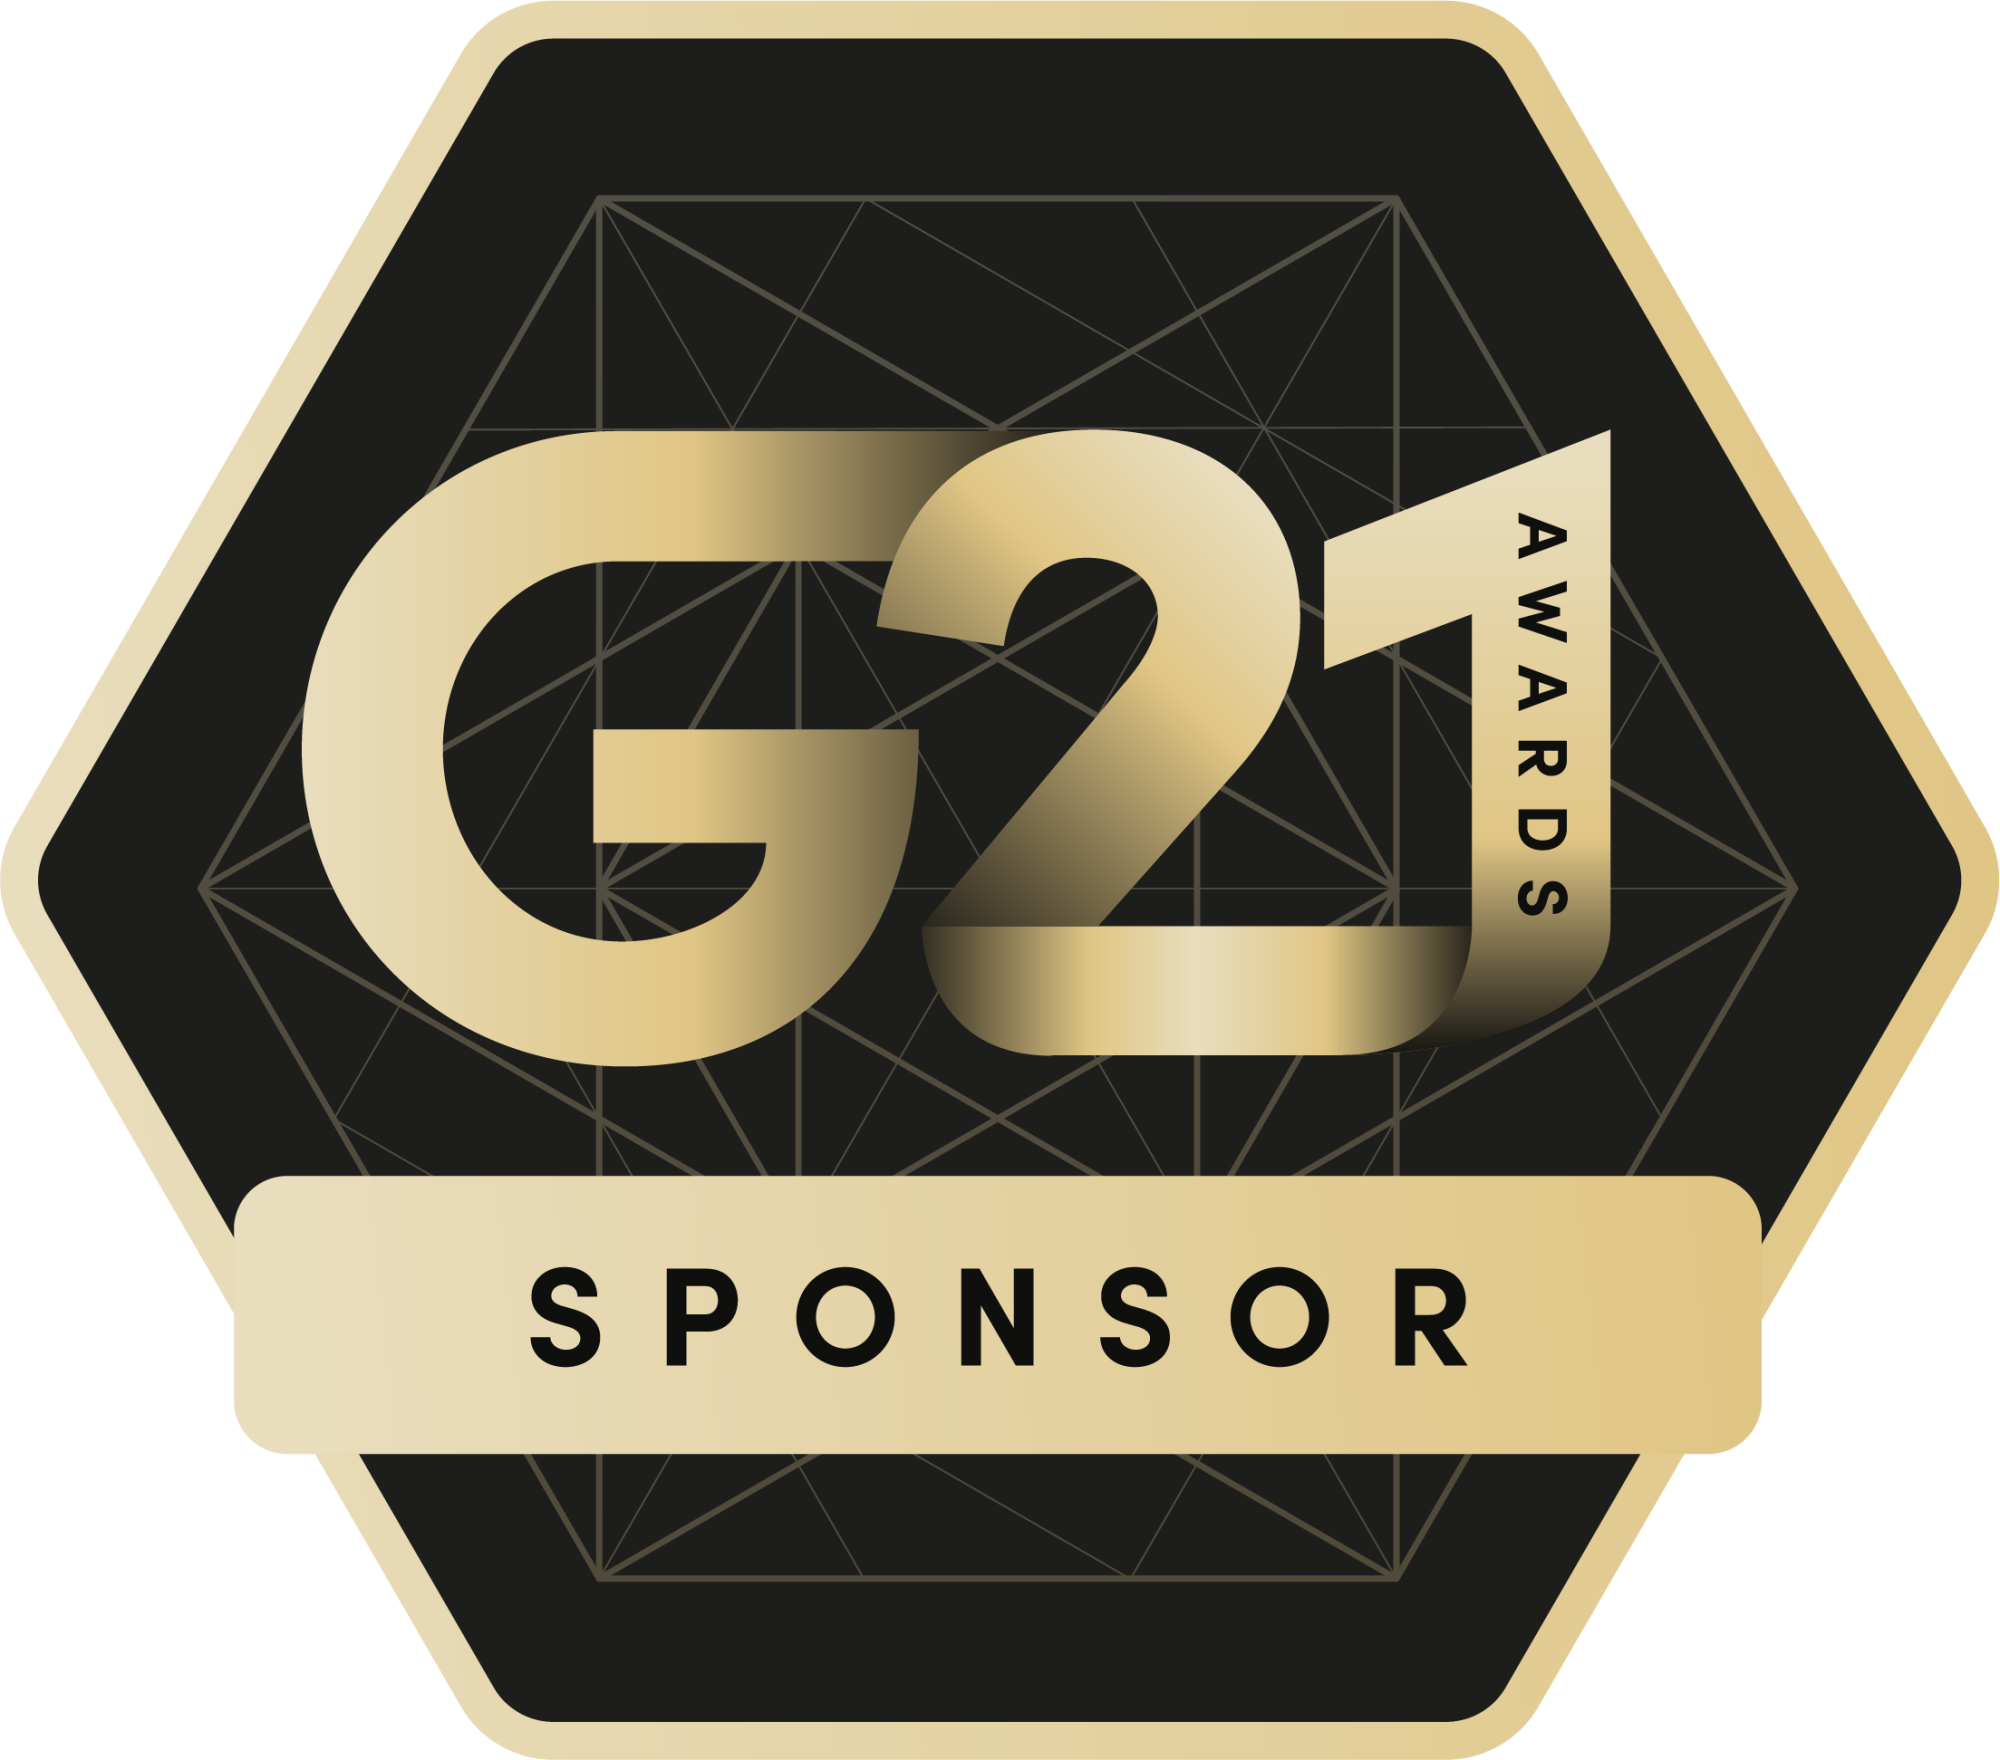 Thermoseal Group will again sponsor the G-Awards Champagne Reception.